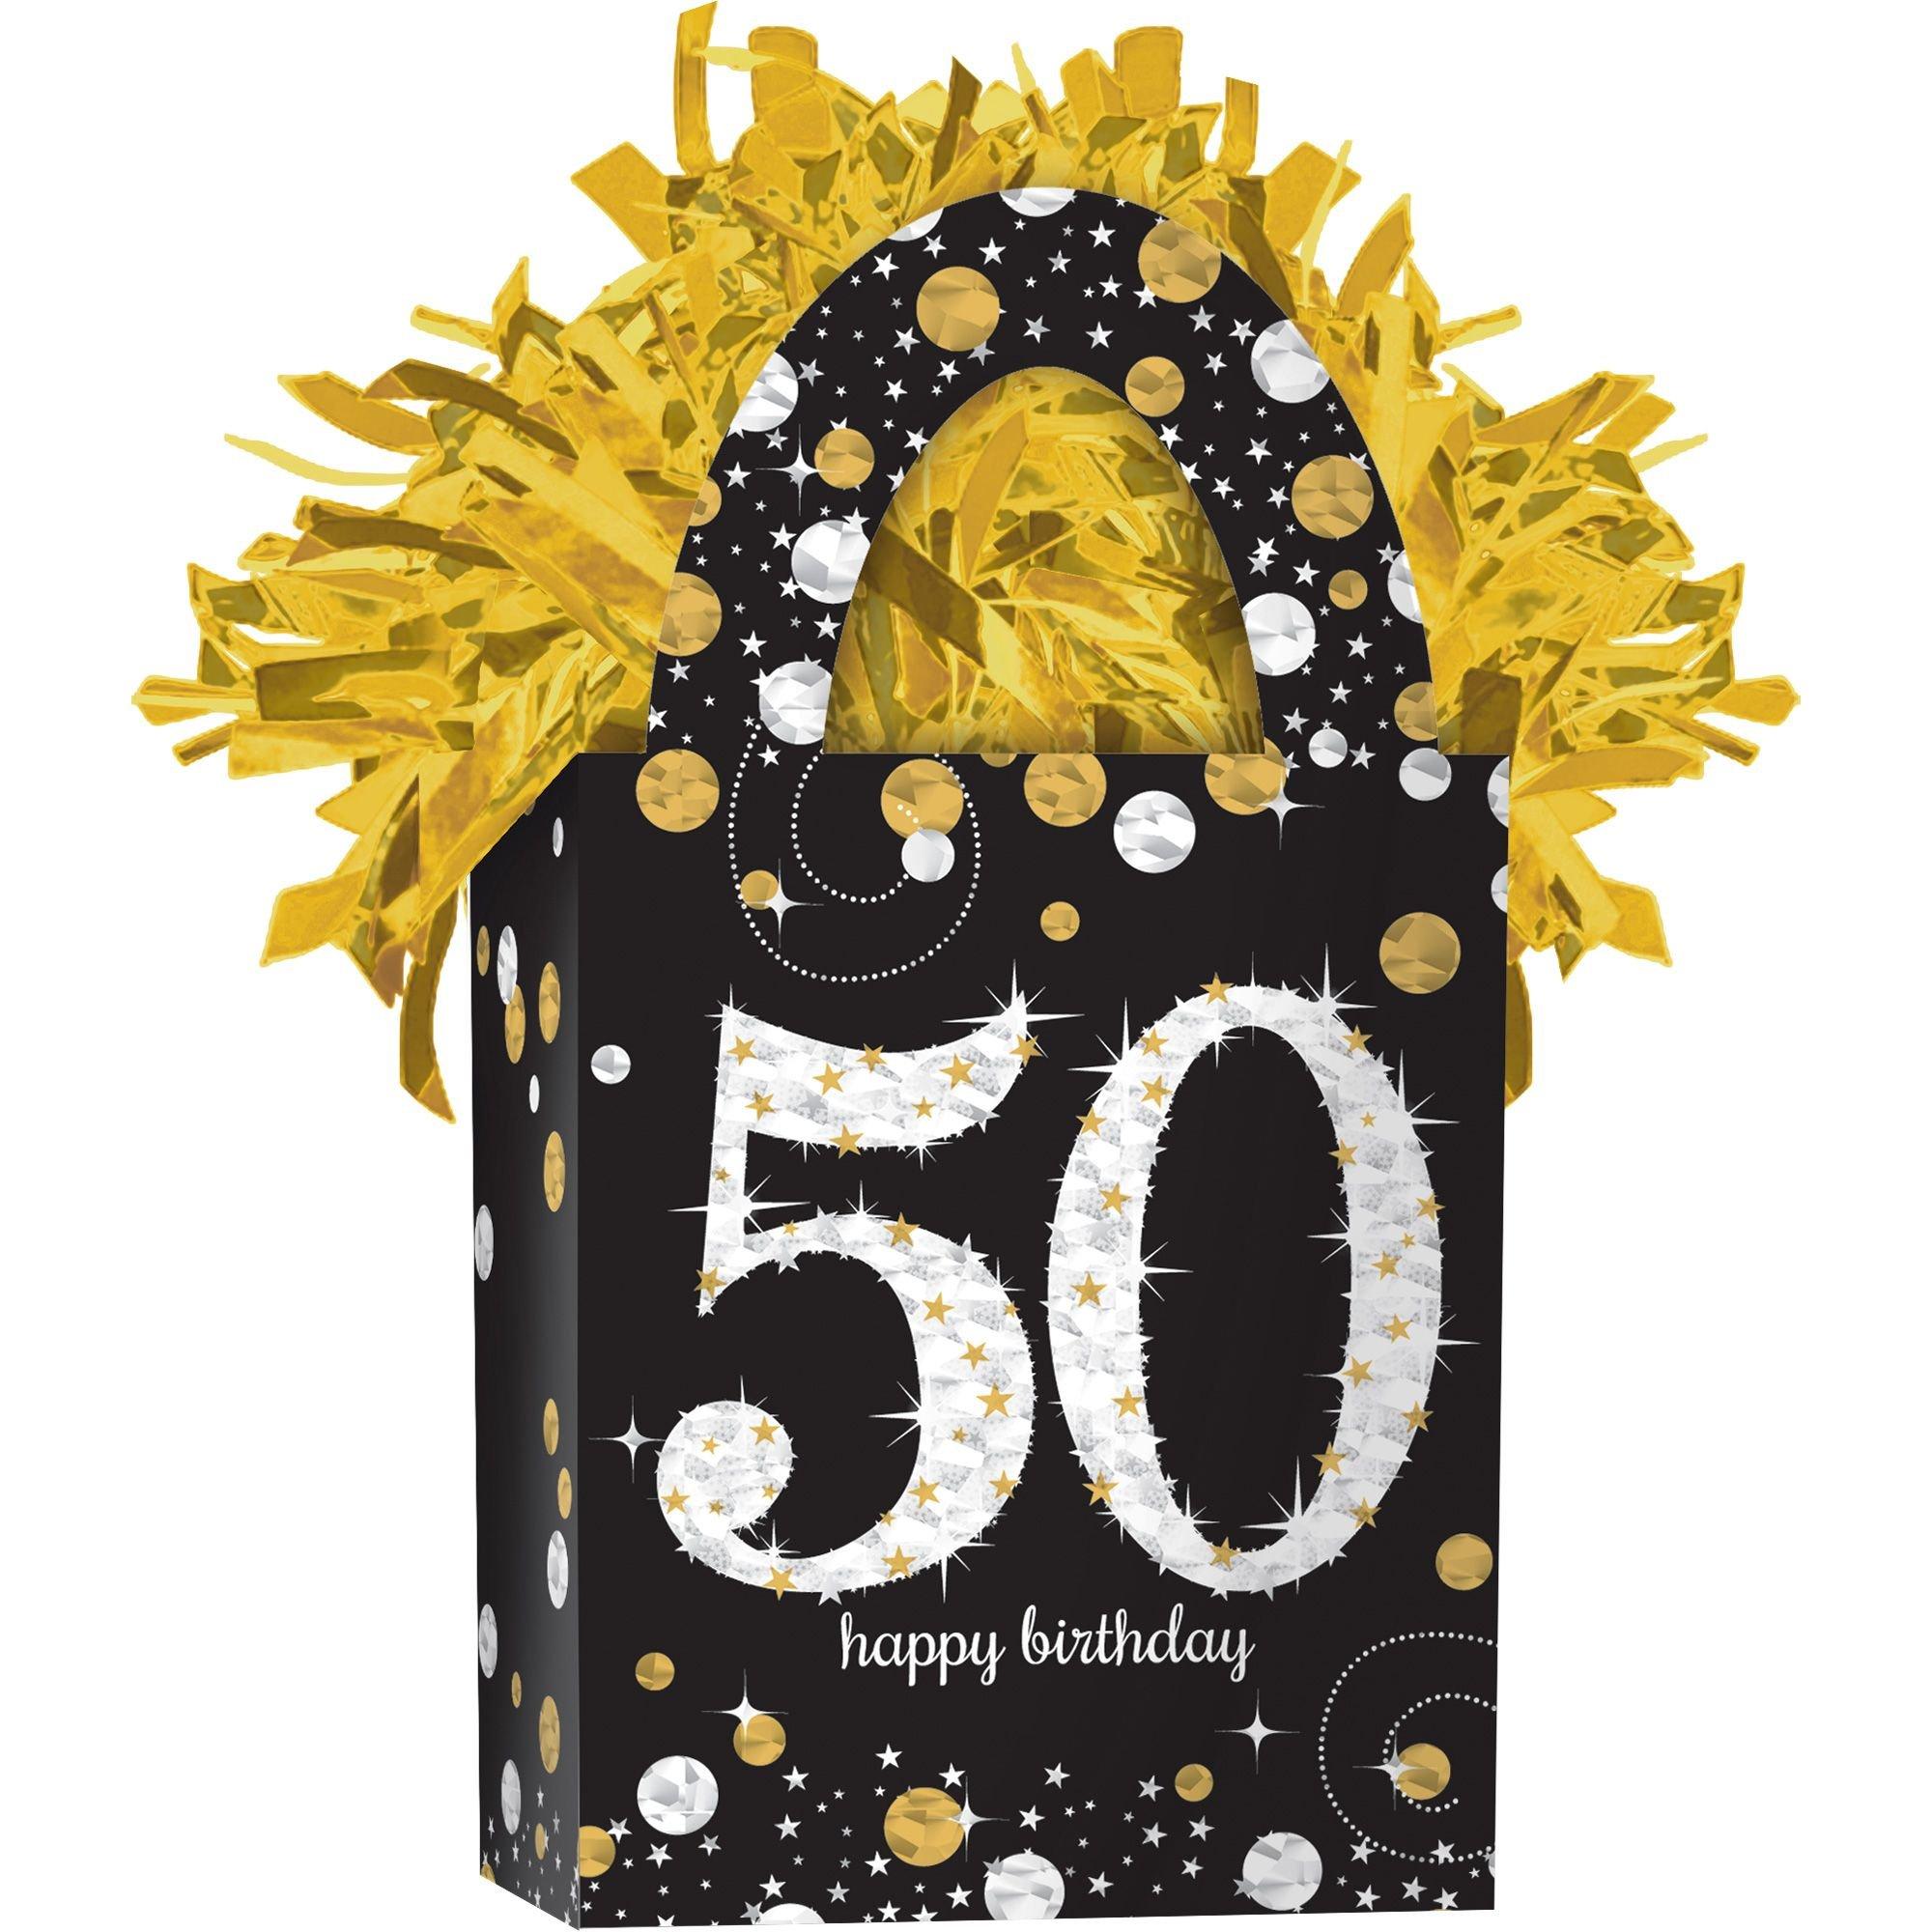 Black & Gold 50th Birthday Surprise Party